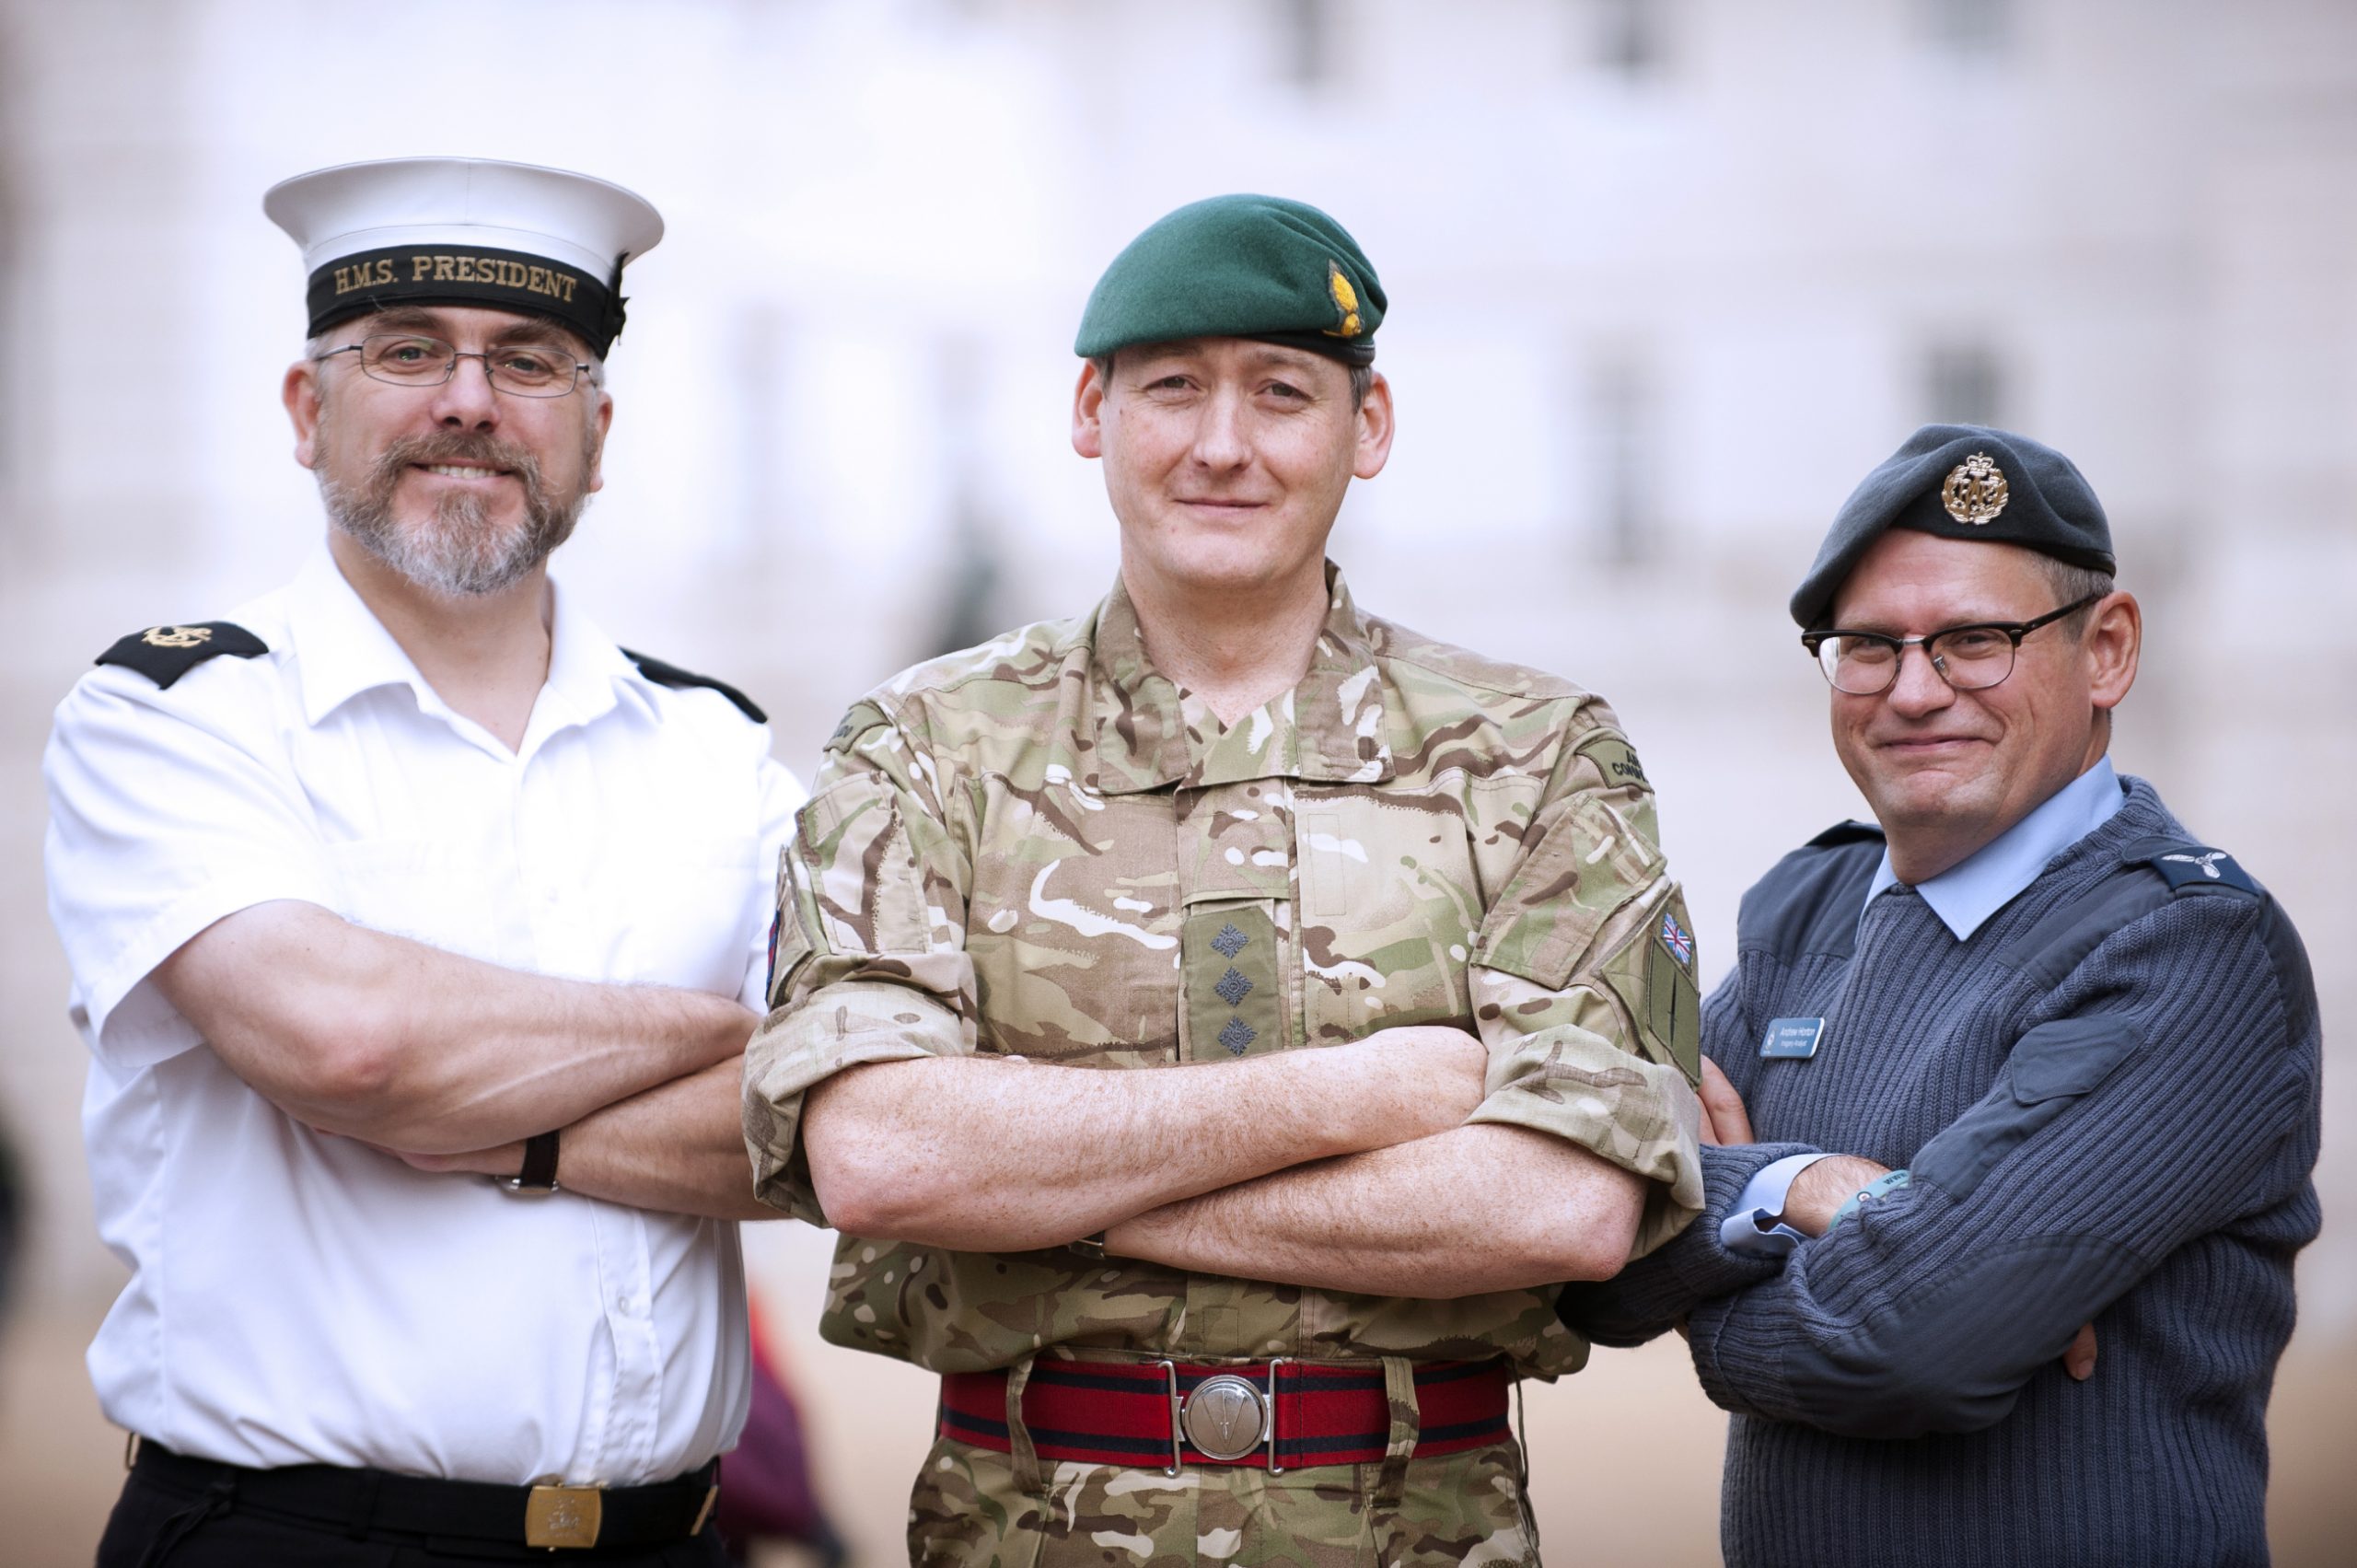 A Reservist from each of the the three main reserve service. From left, a Royal Naval Reserve, Army Reserve and Royal Air Force Reserve.

There are around 35,000 Volunteer Reservists in the UK. Coming from all backgrounds, regions and jobs, these are ordinary men and women who give up their time to train and serve alongside the Regular Forces.

Volunteer Reservists are called out to supplement the Regular Forces whenever Operational demands require it. If they’re mobilised they’ll carry out the same roles to the same high standards as their Regular counterparts. They also receive the same world-class training and develop the same skills.

Reservists make up around 14% of the nation's total defence capacity which in turn makes them an essential part of our defence strategy. They are called upon as individuals for their specific skills or as ready-formed units to serve alongside the Regular Forces whenever required.

MoD Consent Forms signed and held by Photographer